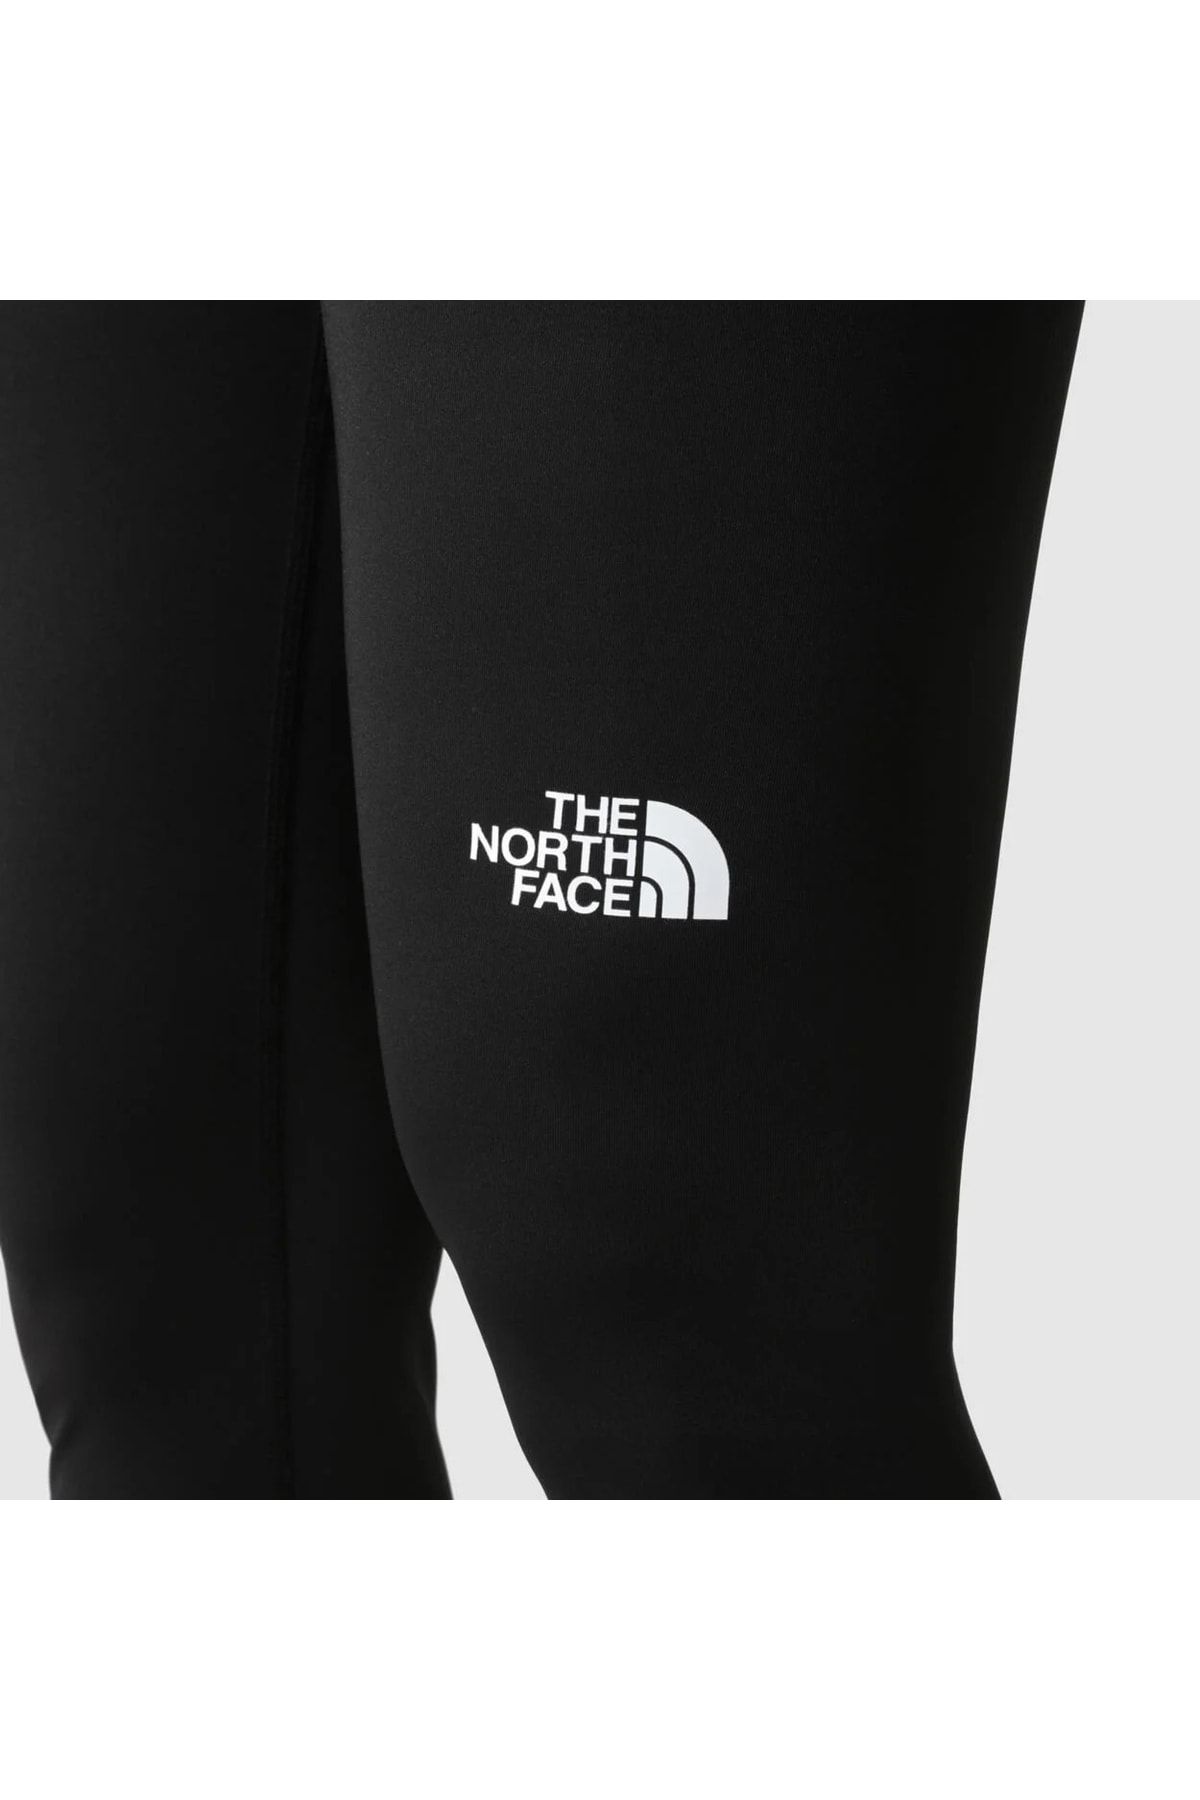 The North Face Women's Flex Mid Rise Tights Nf0a7zb7ky41 - Trendyol